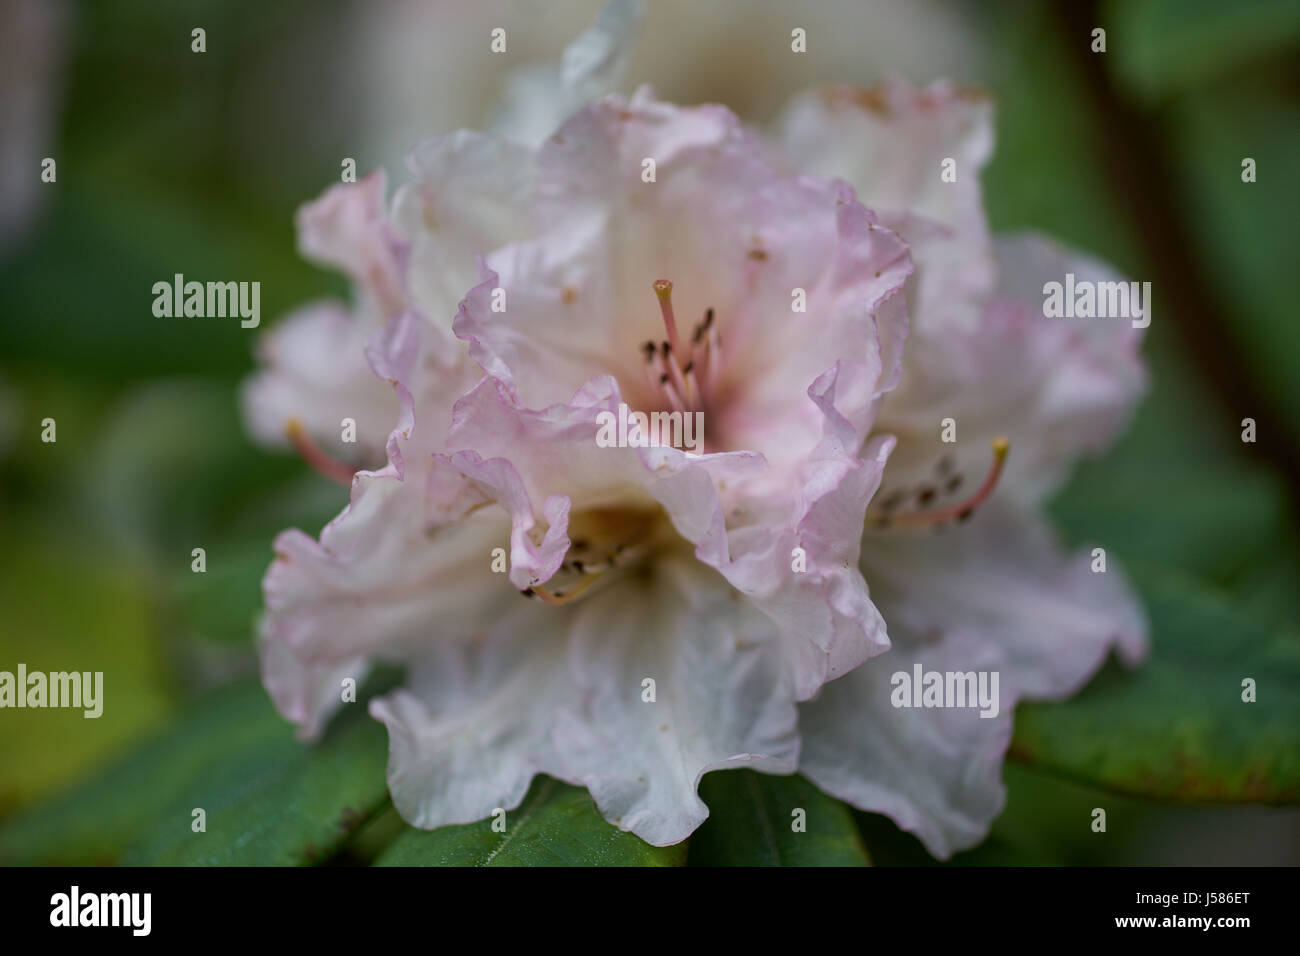 White pinkish Rhododendron Adriaan Koster blossom flowers close up Stock Photo